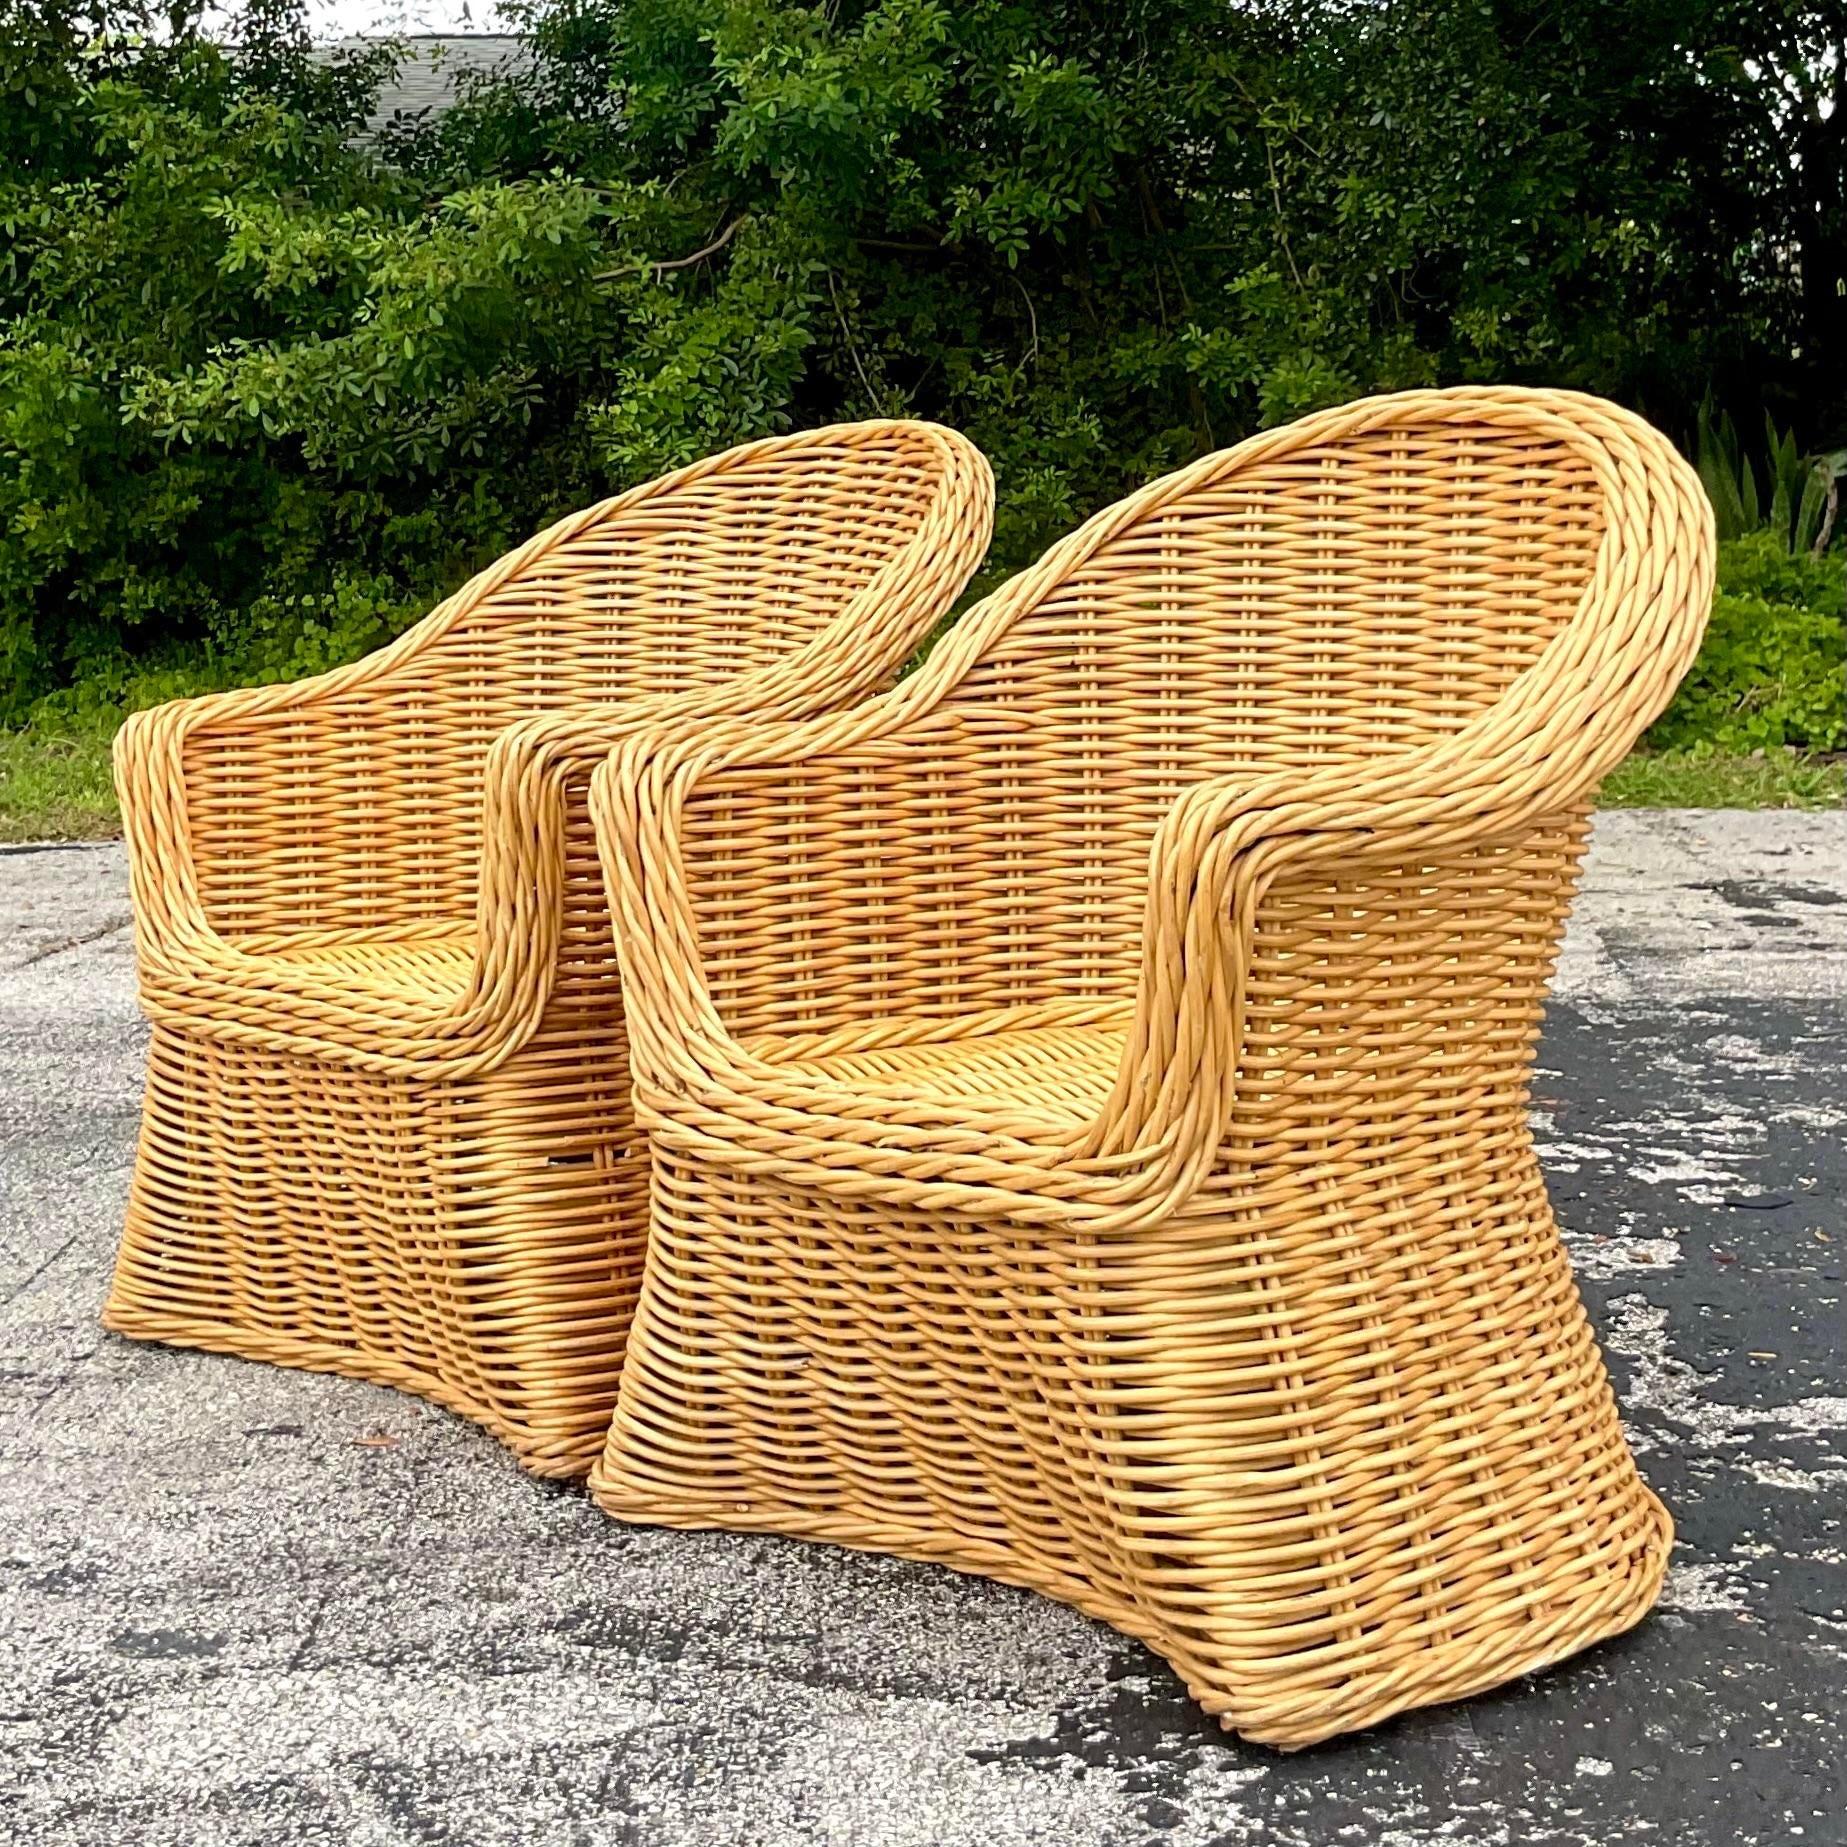 A fabulous pair of vintage Coastal lounge chairs. A chic woven rattan with a heavy trim. Acquired from a Palm Beach estate.